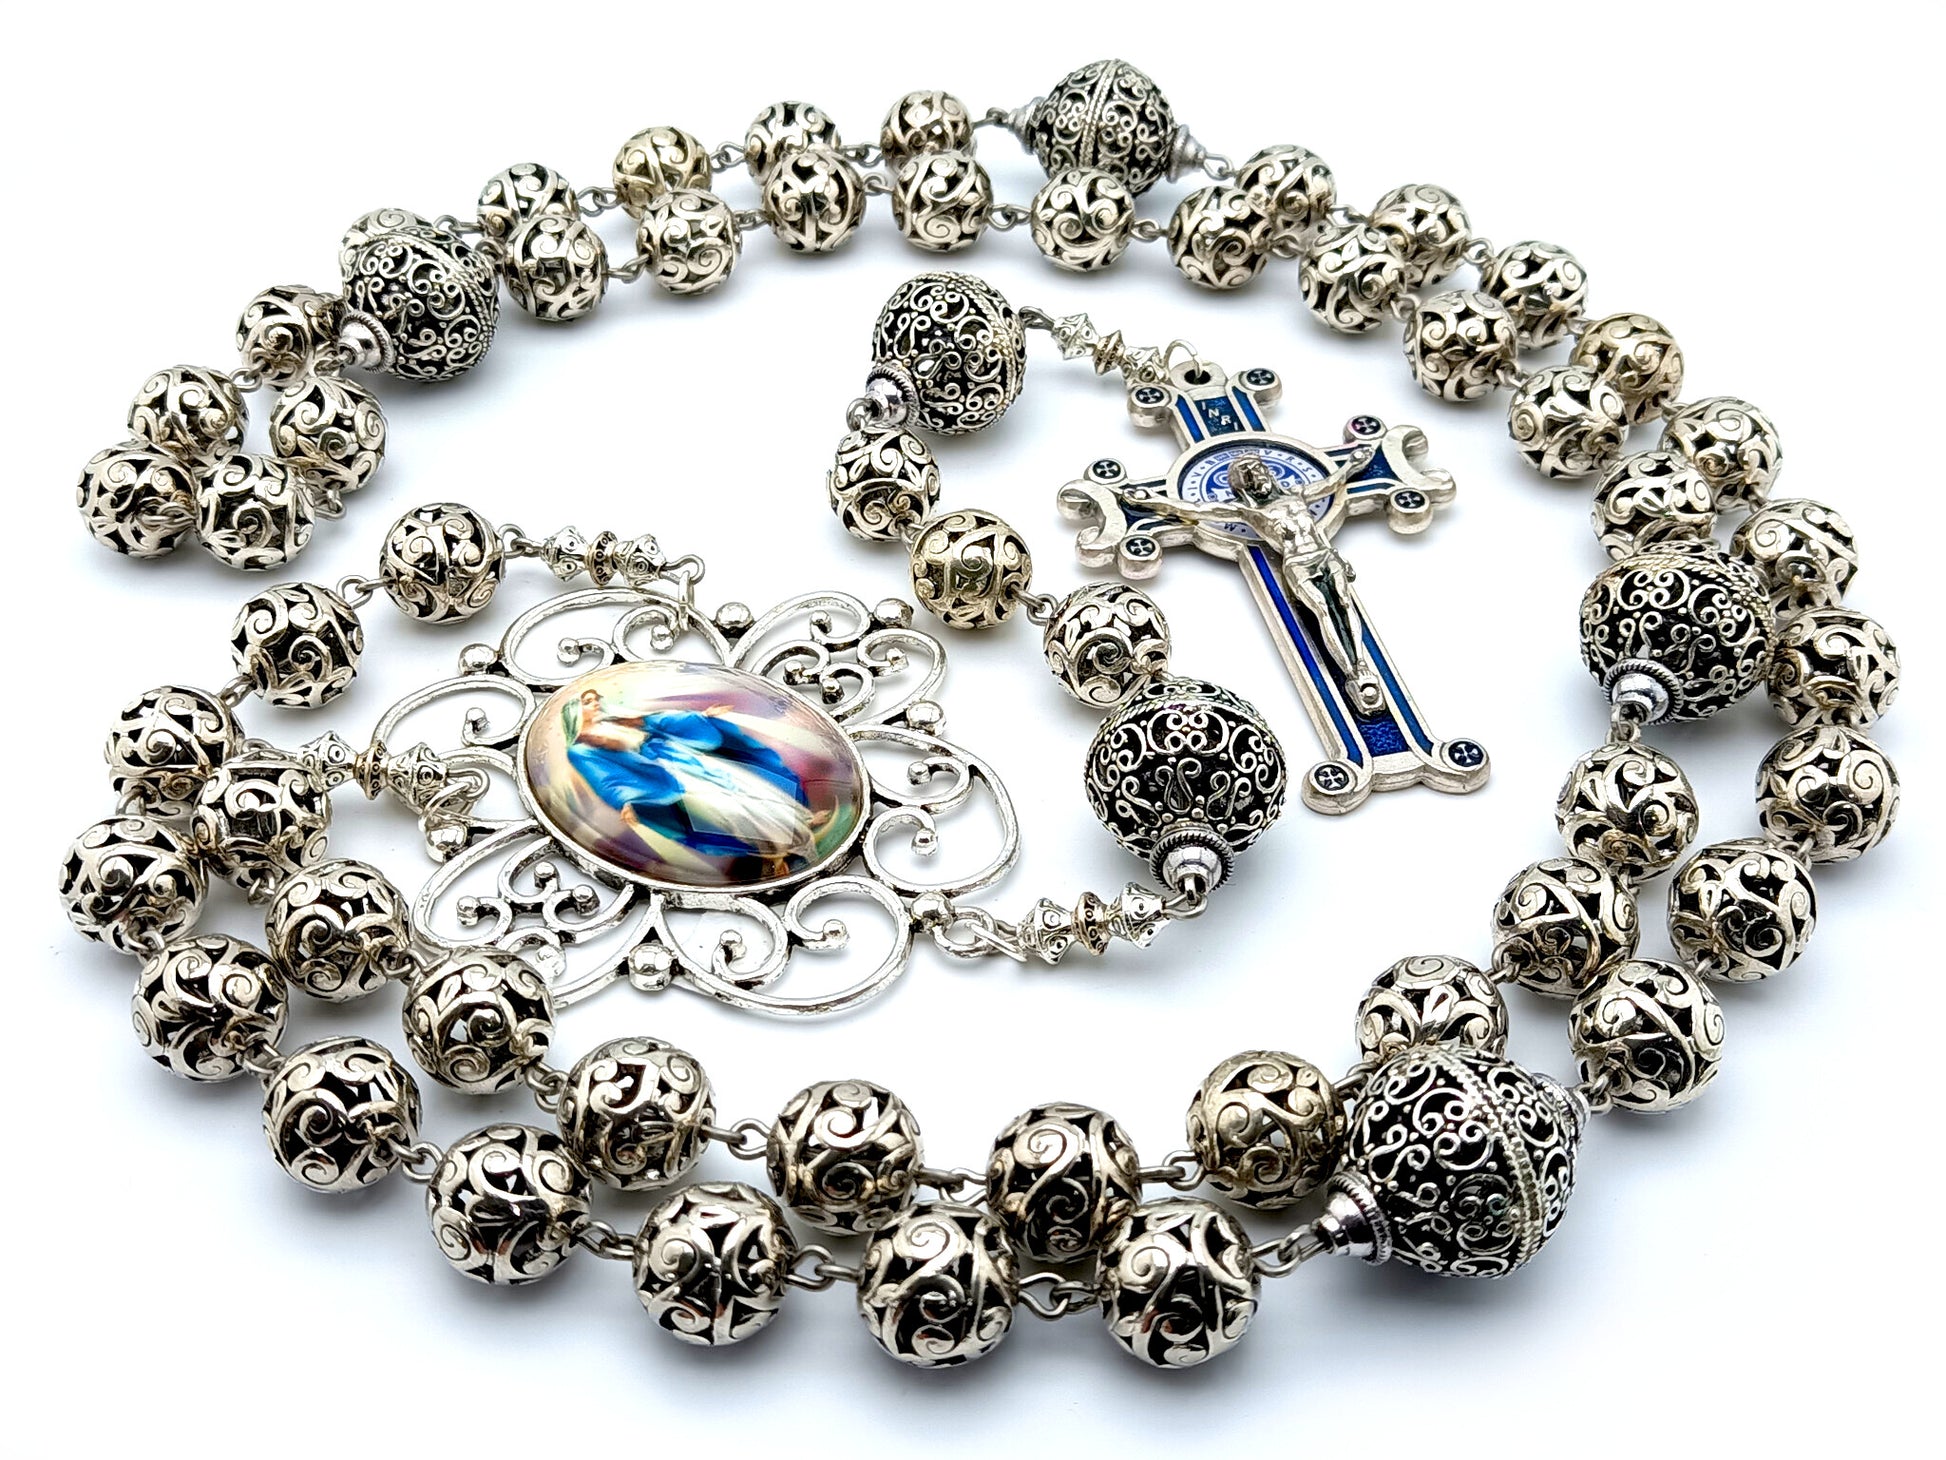 Virgin Mary unique rosary beads with large silver filigree beads, silver and blue enamel crucifix and large picture centre medal.